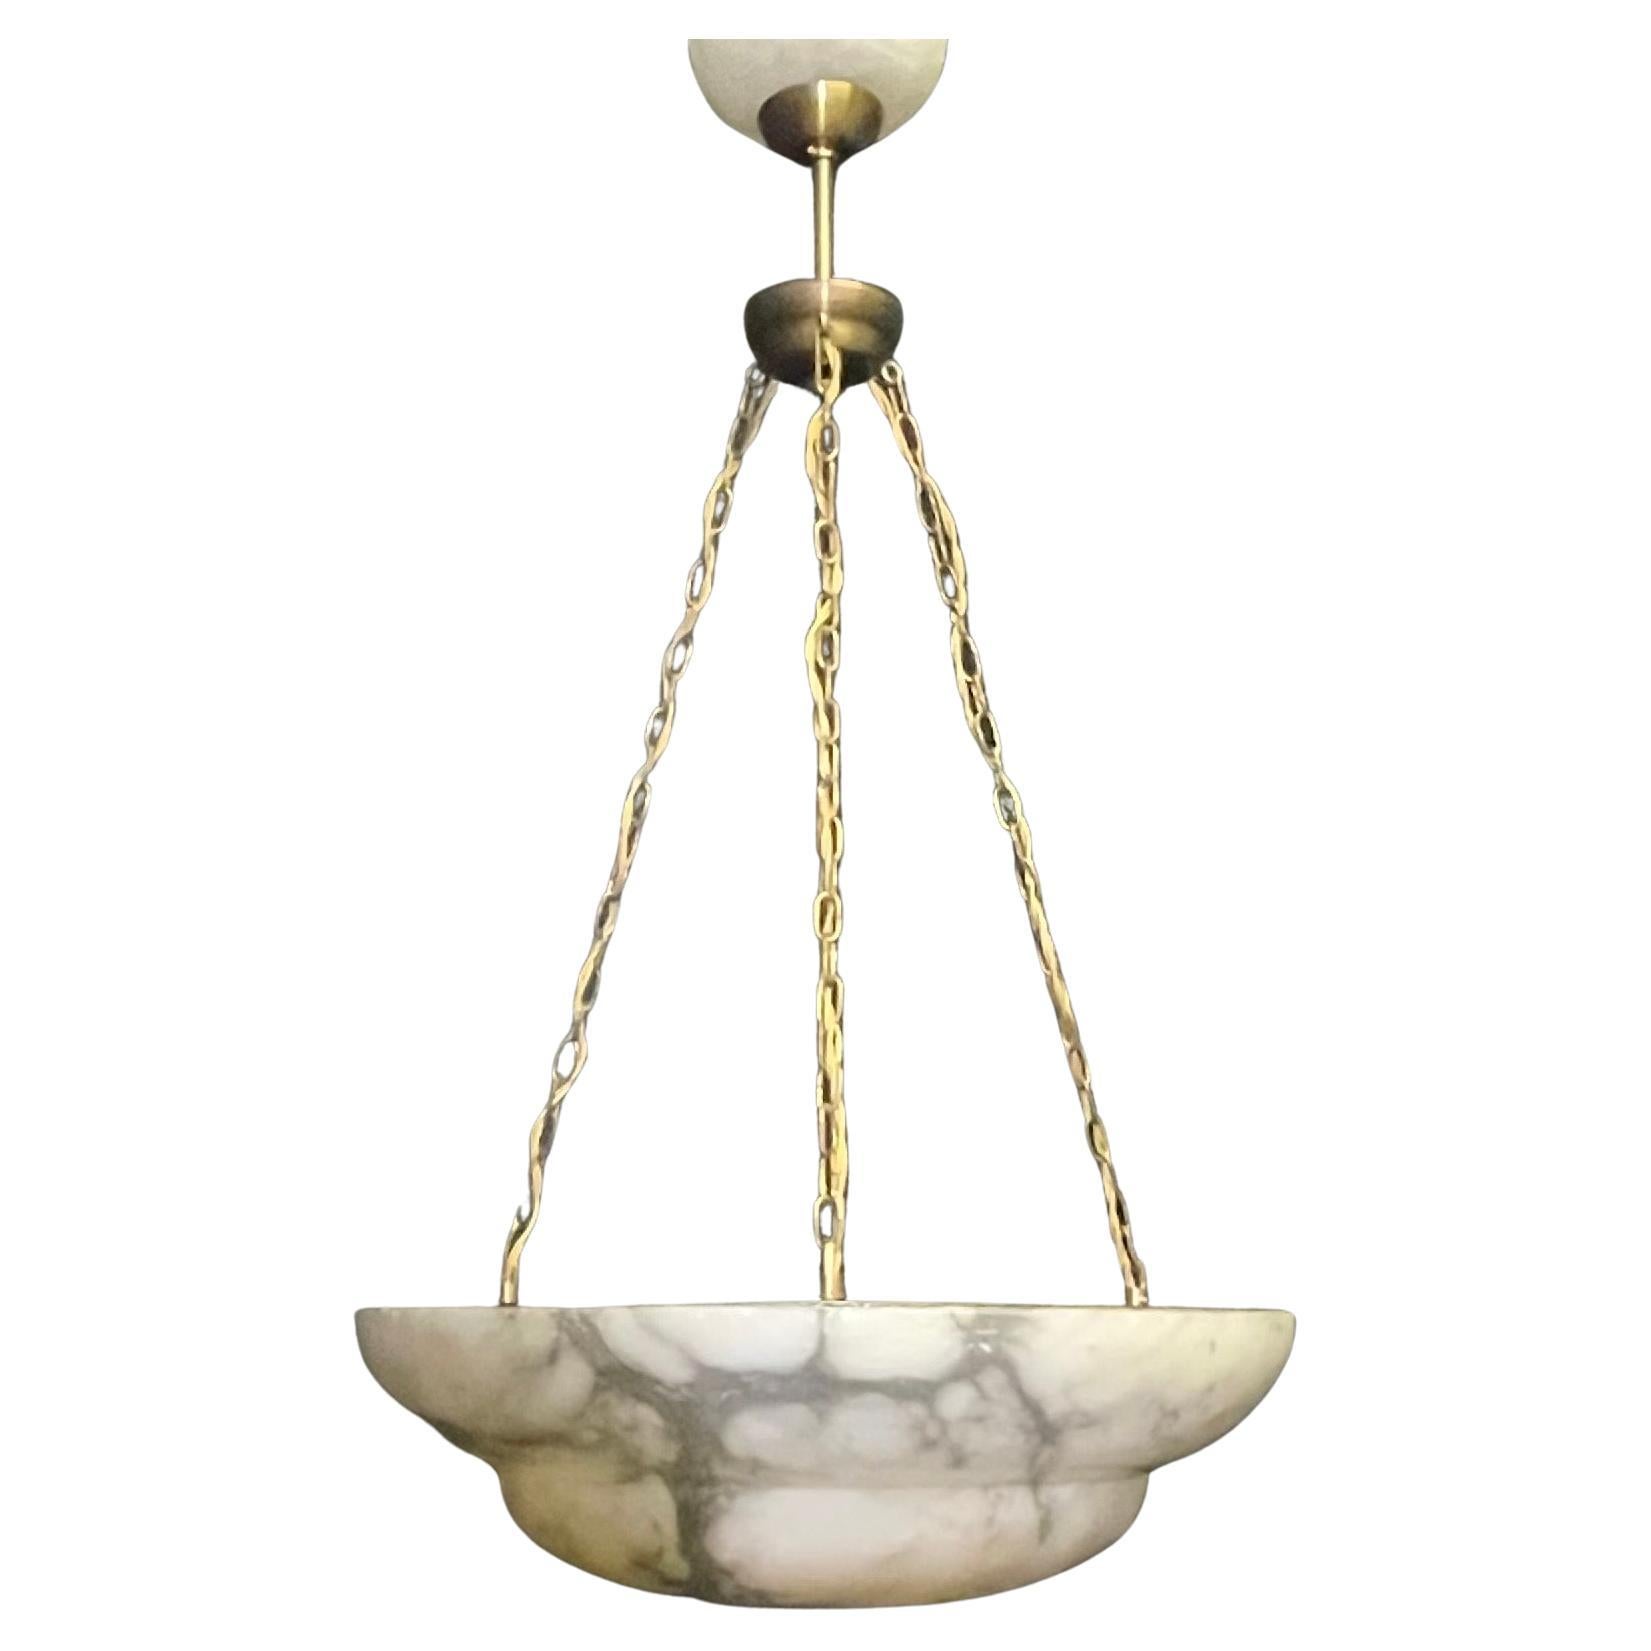 A beautifully marbled large alabaster bowl pendant ( France, circa 1925) with a newly made solid burnished brass mount.
Socket: 3 x E27 or E26 (for Us standards).
Diameter: 20.47 inches.
Weight: ca. 26.45 Ibs.